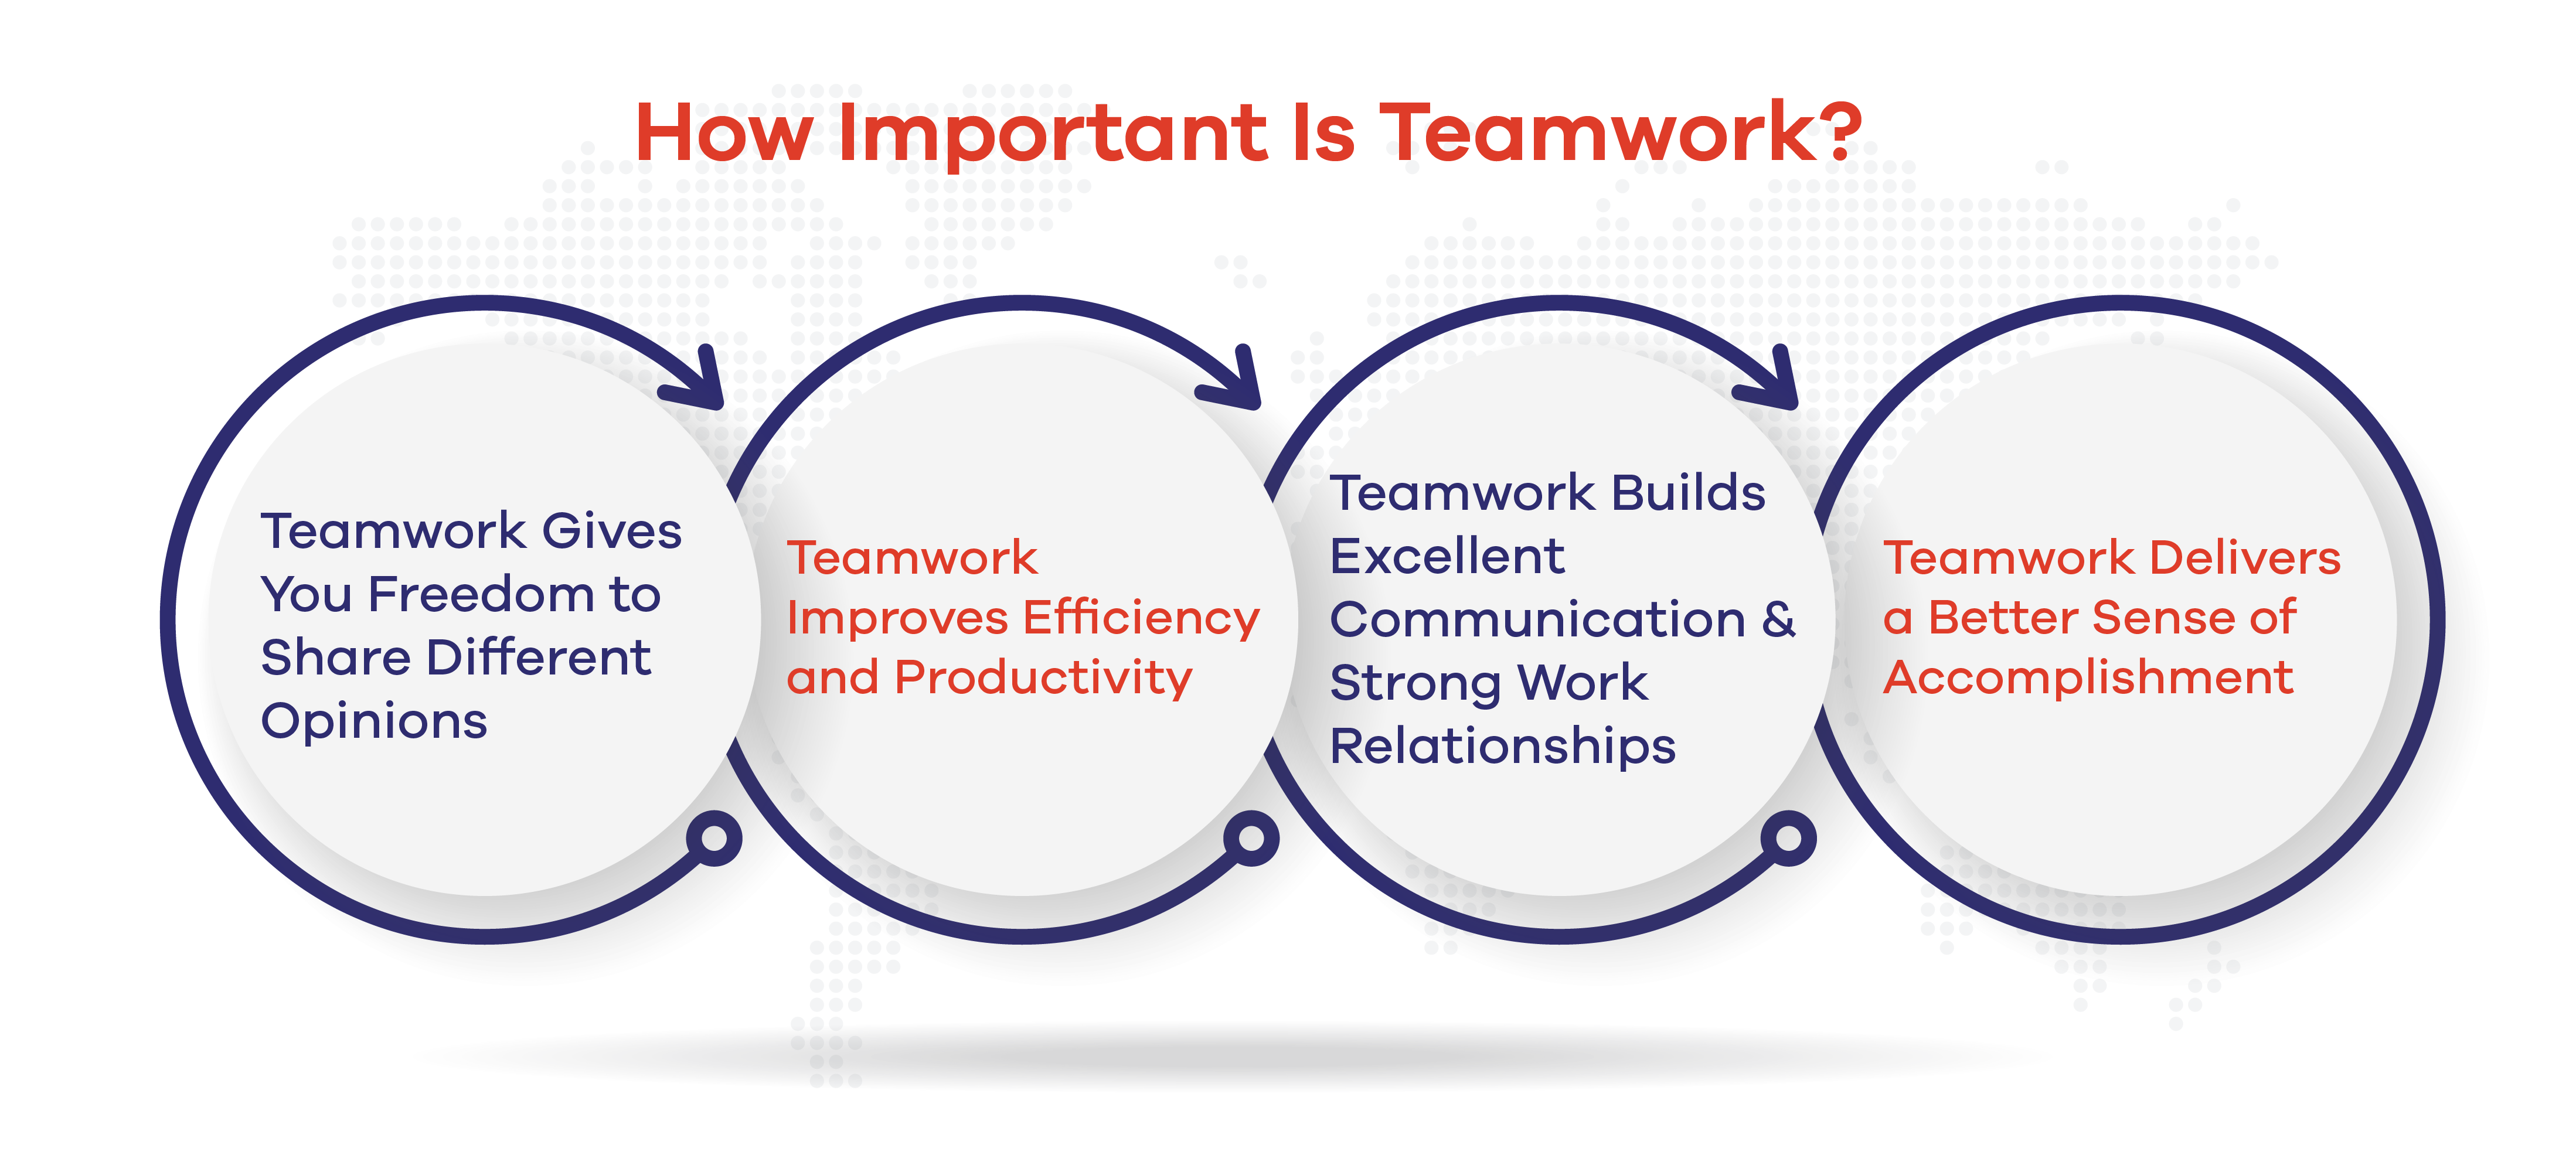 How Important Is Teamwork? 